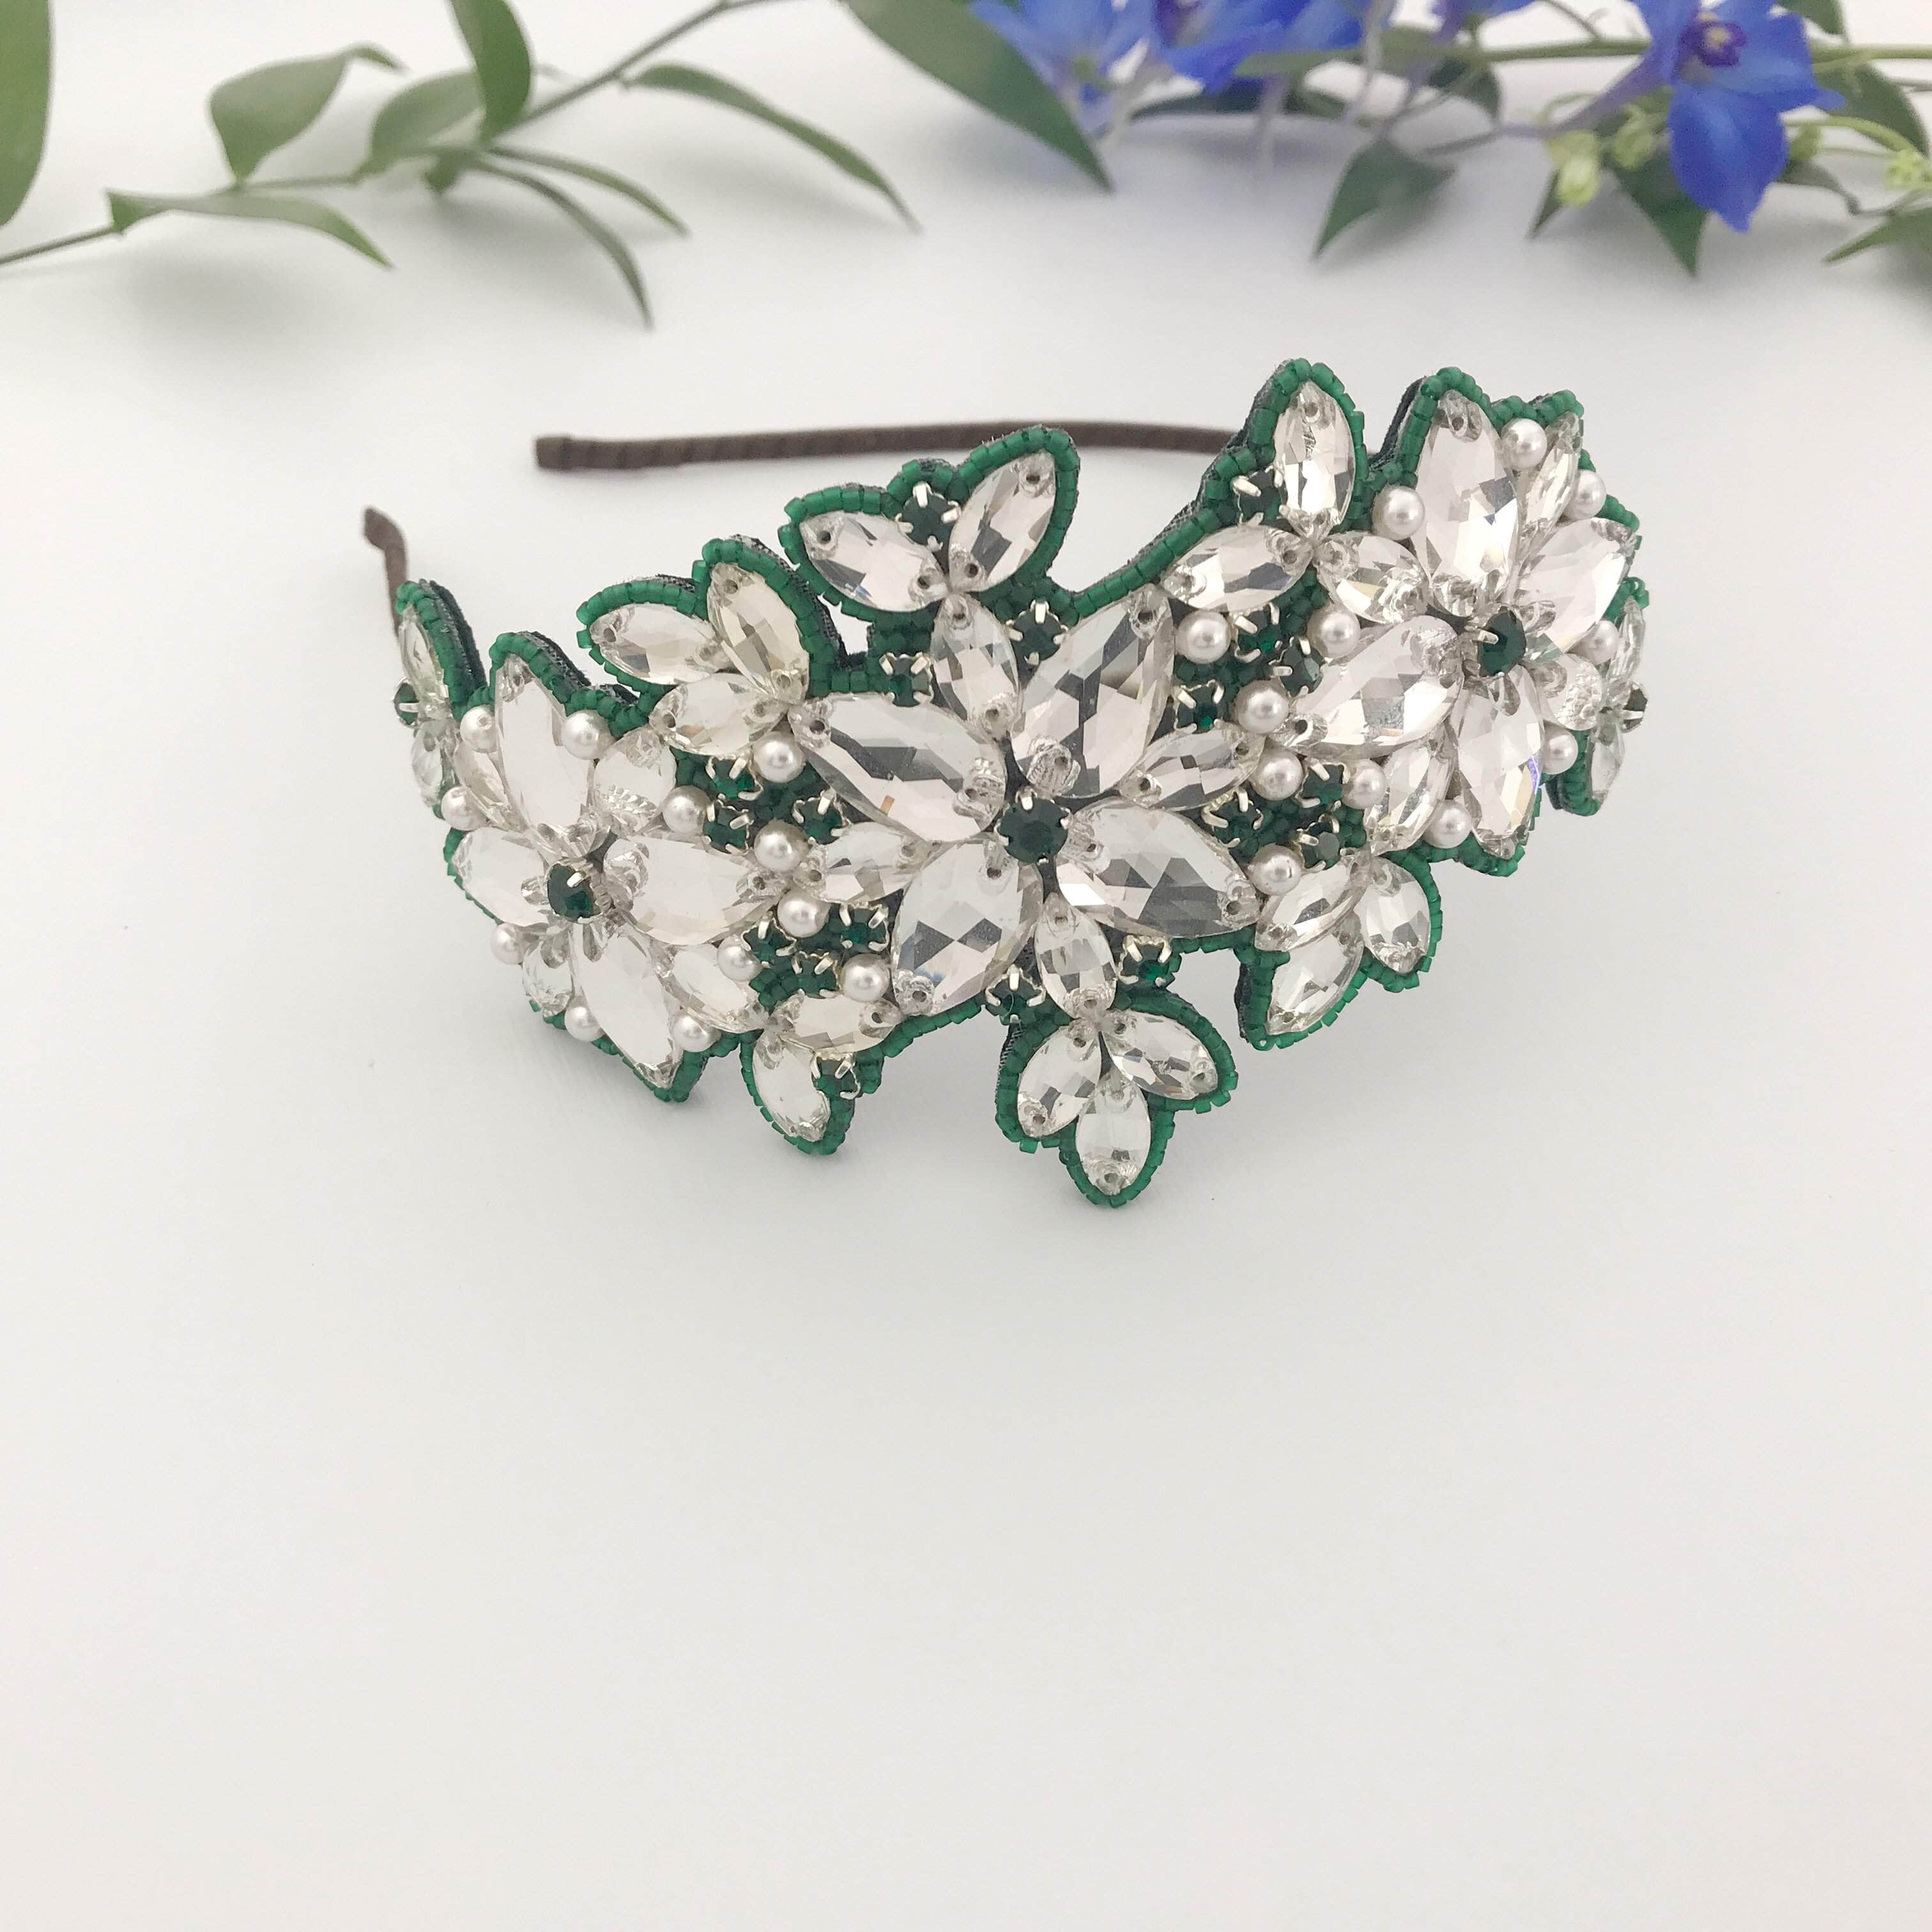 Large crystal hair band with green beading around the outside